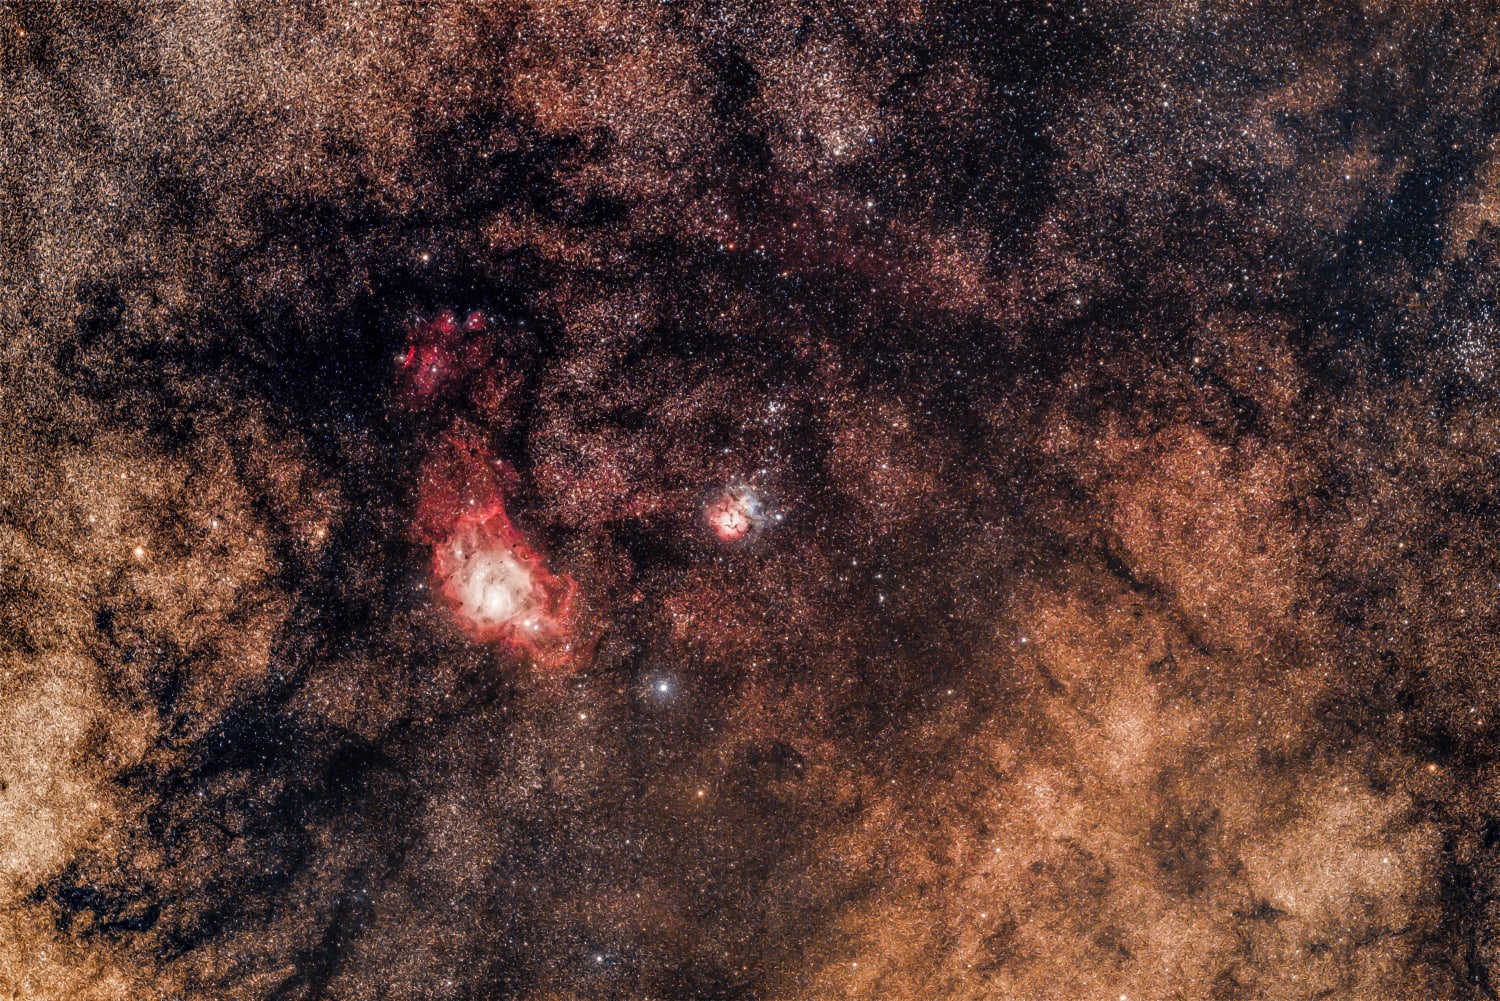 One of my favorite parts of the sky. The Lagoon nebula and Trifid nebula, surrounded by pretty interstellar dust. A little over an hour worth of data taken from Al Sadeem Observatory, Abu Dhabi, UAE.